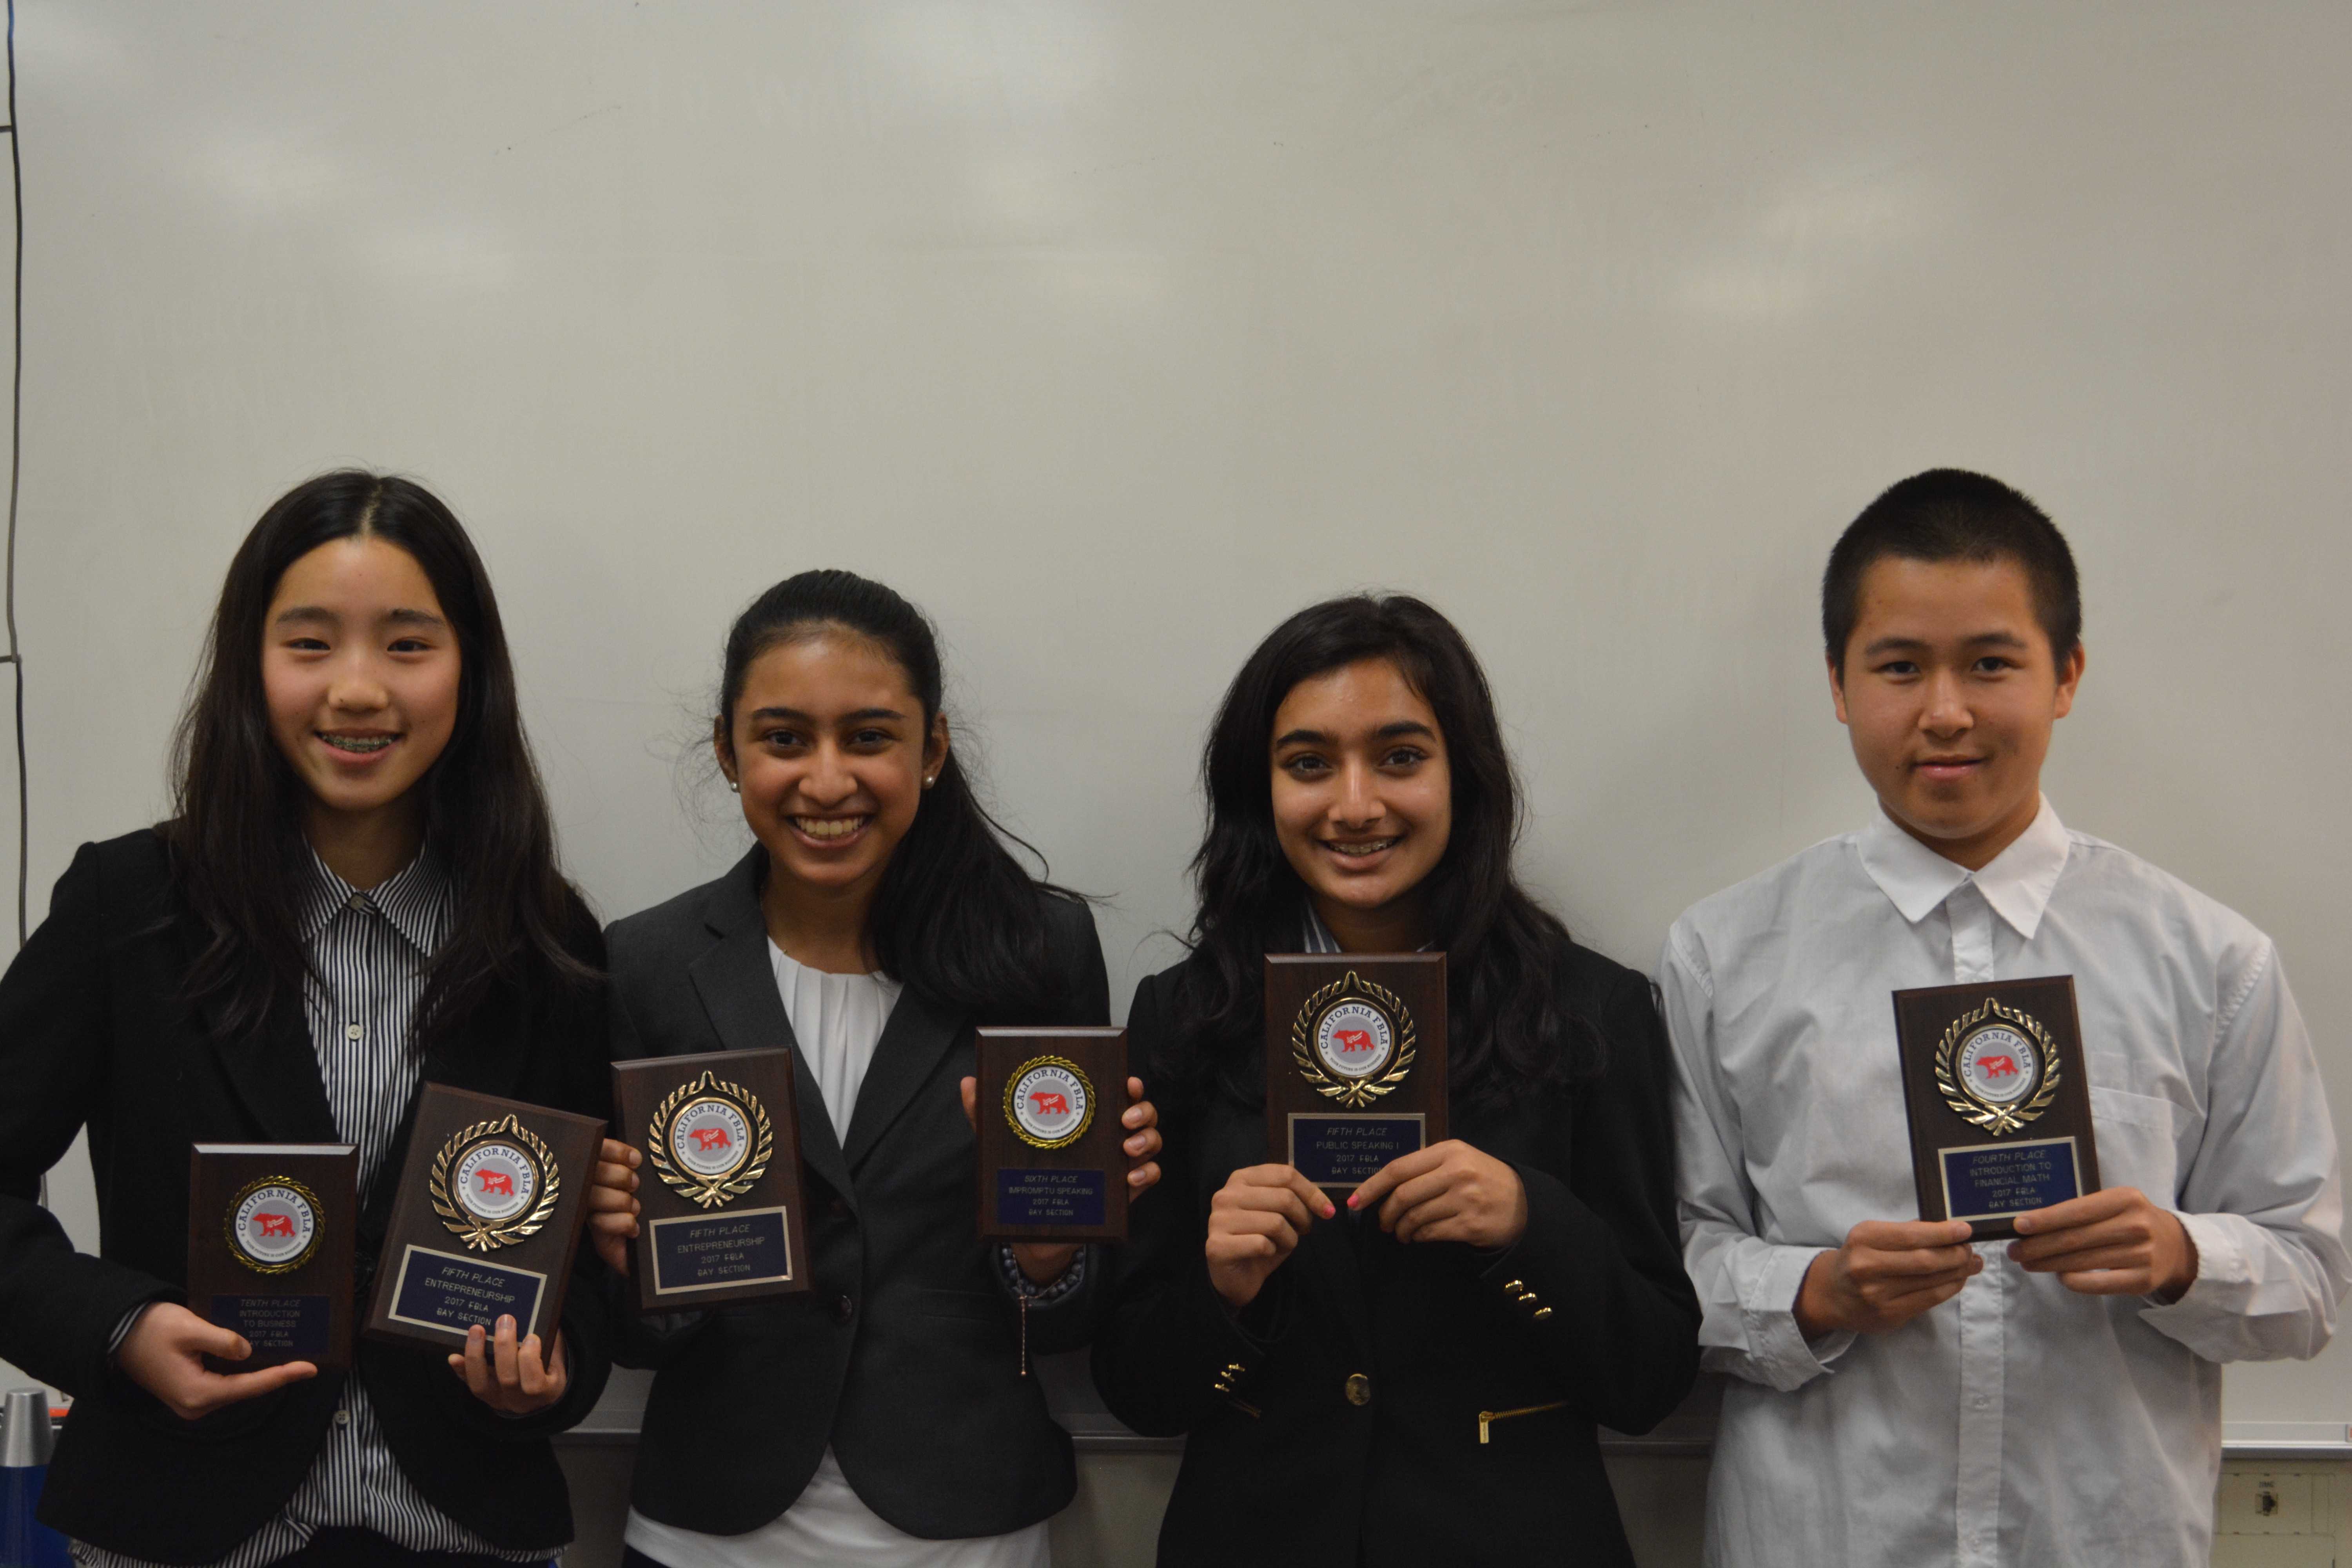 Left to right: Emily Wang, Ria Vora, Soumya Jhaveri and Leyton Ho pose with their plaques after placing at different conference events. Caity Berry, not pictured, also placed at the conference. Wang, Vora, and Ho will be competing at an upcoming state conference.